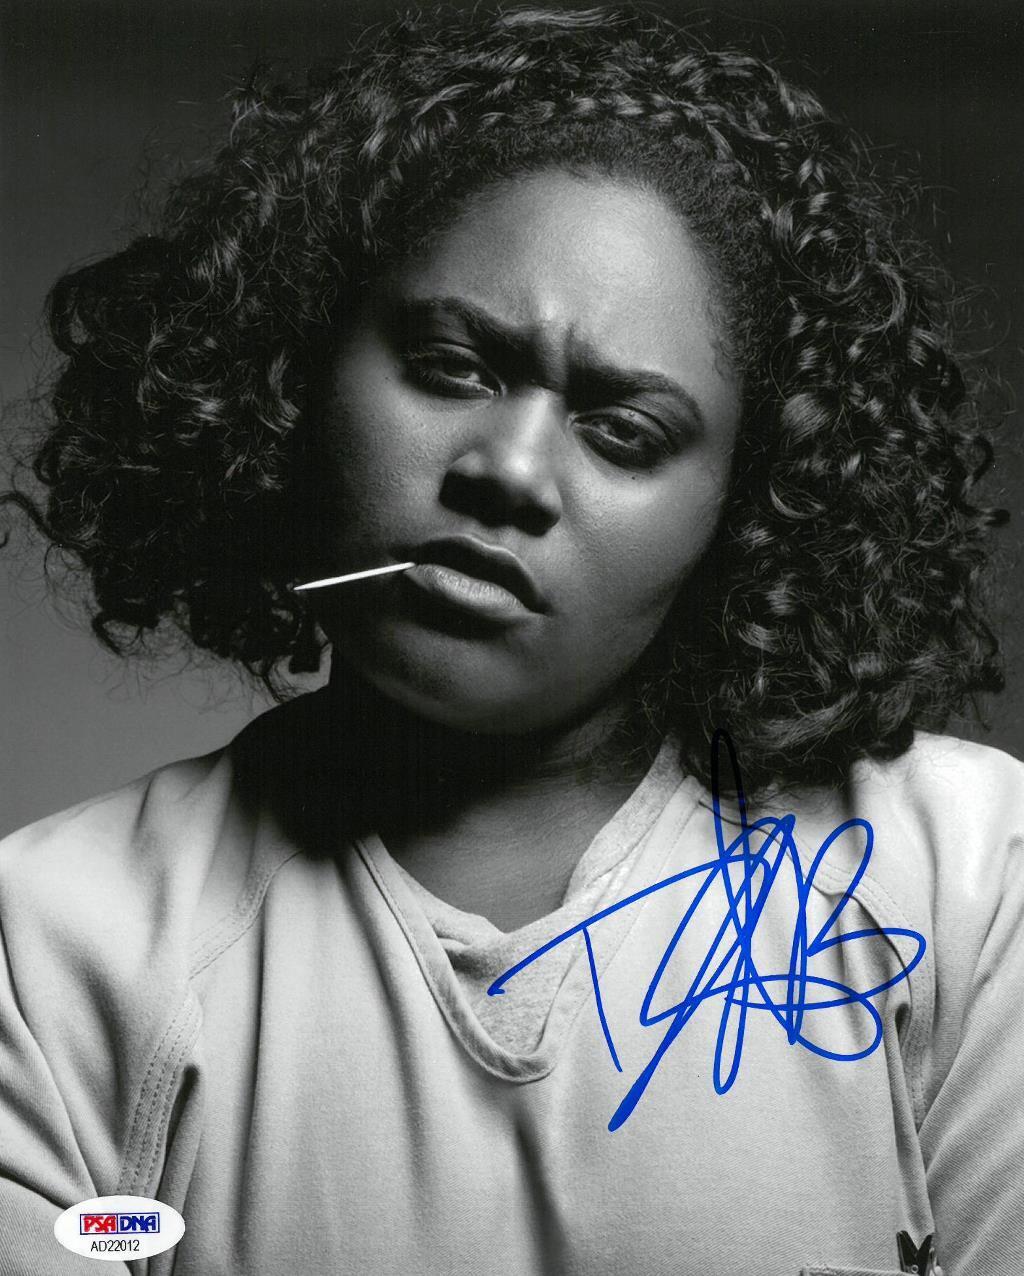 Danielle Brooks Signed OITNB Authentic Autographed 8x10 Photo Poster painting PSA/DNA #AD22012